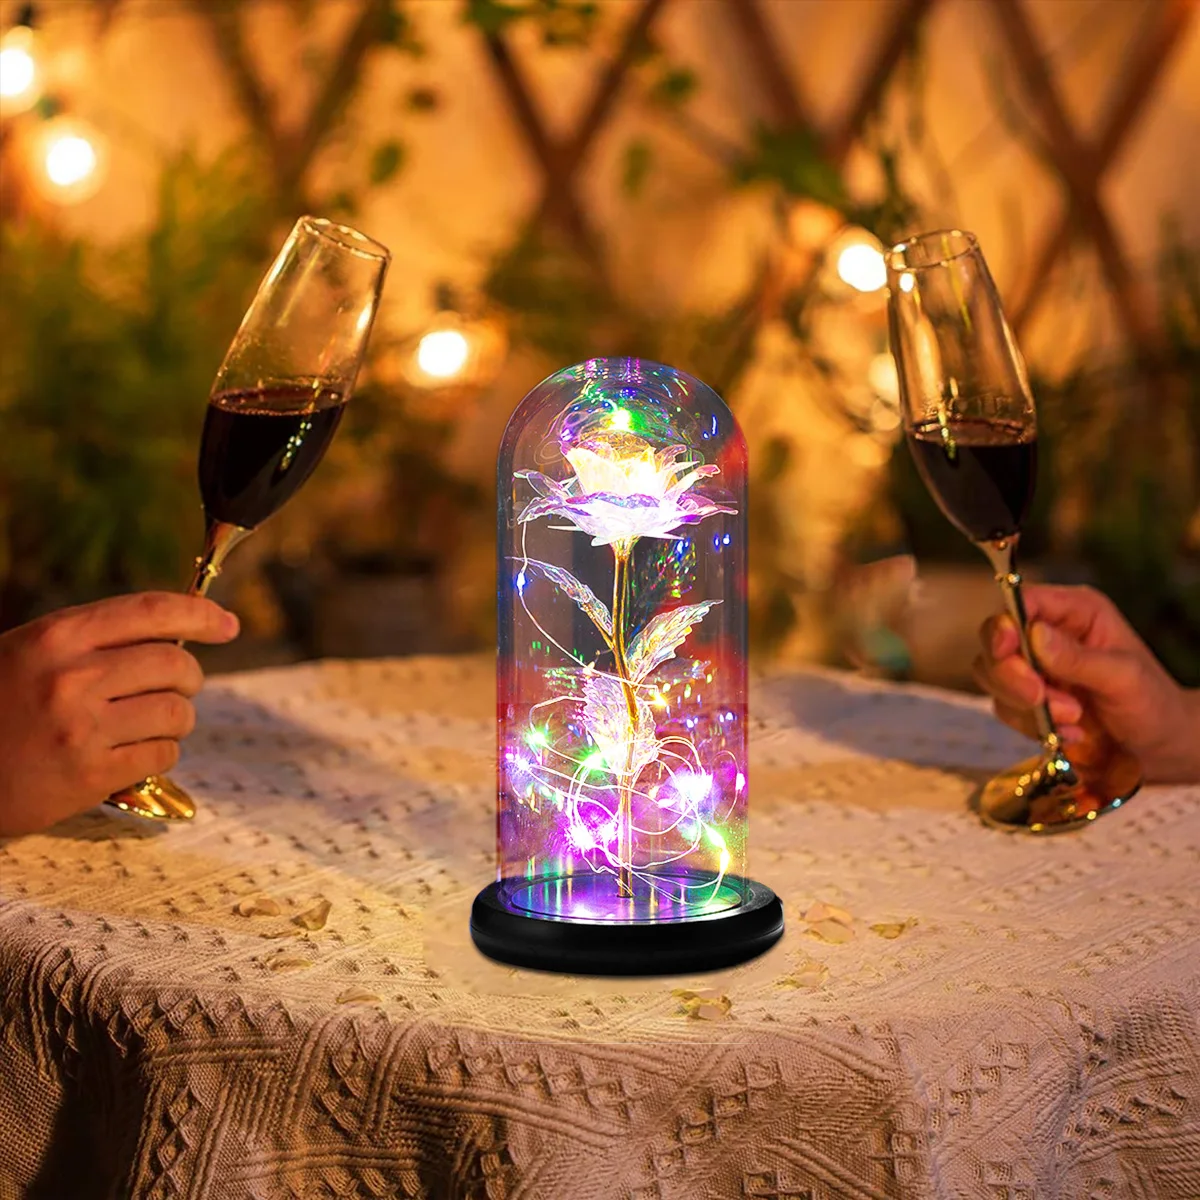 Crystal Eternal Rose In Glass Dome With LED Light